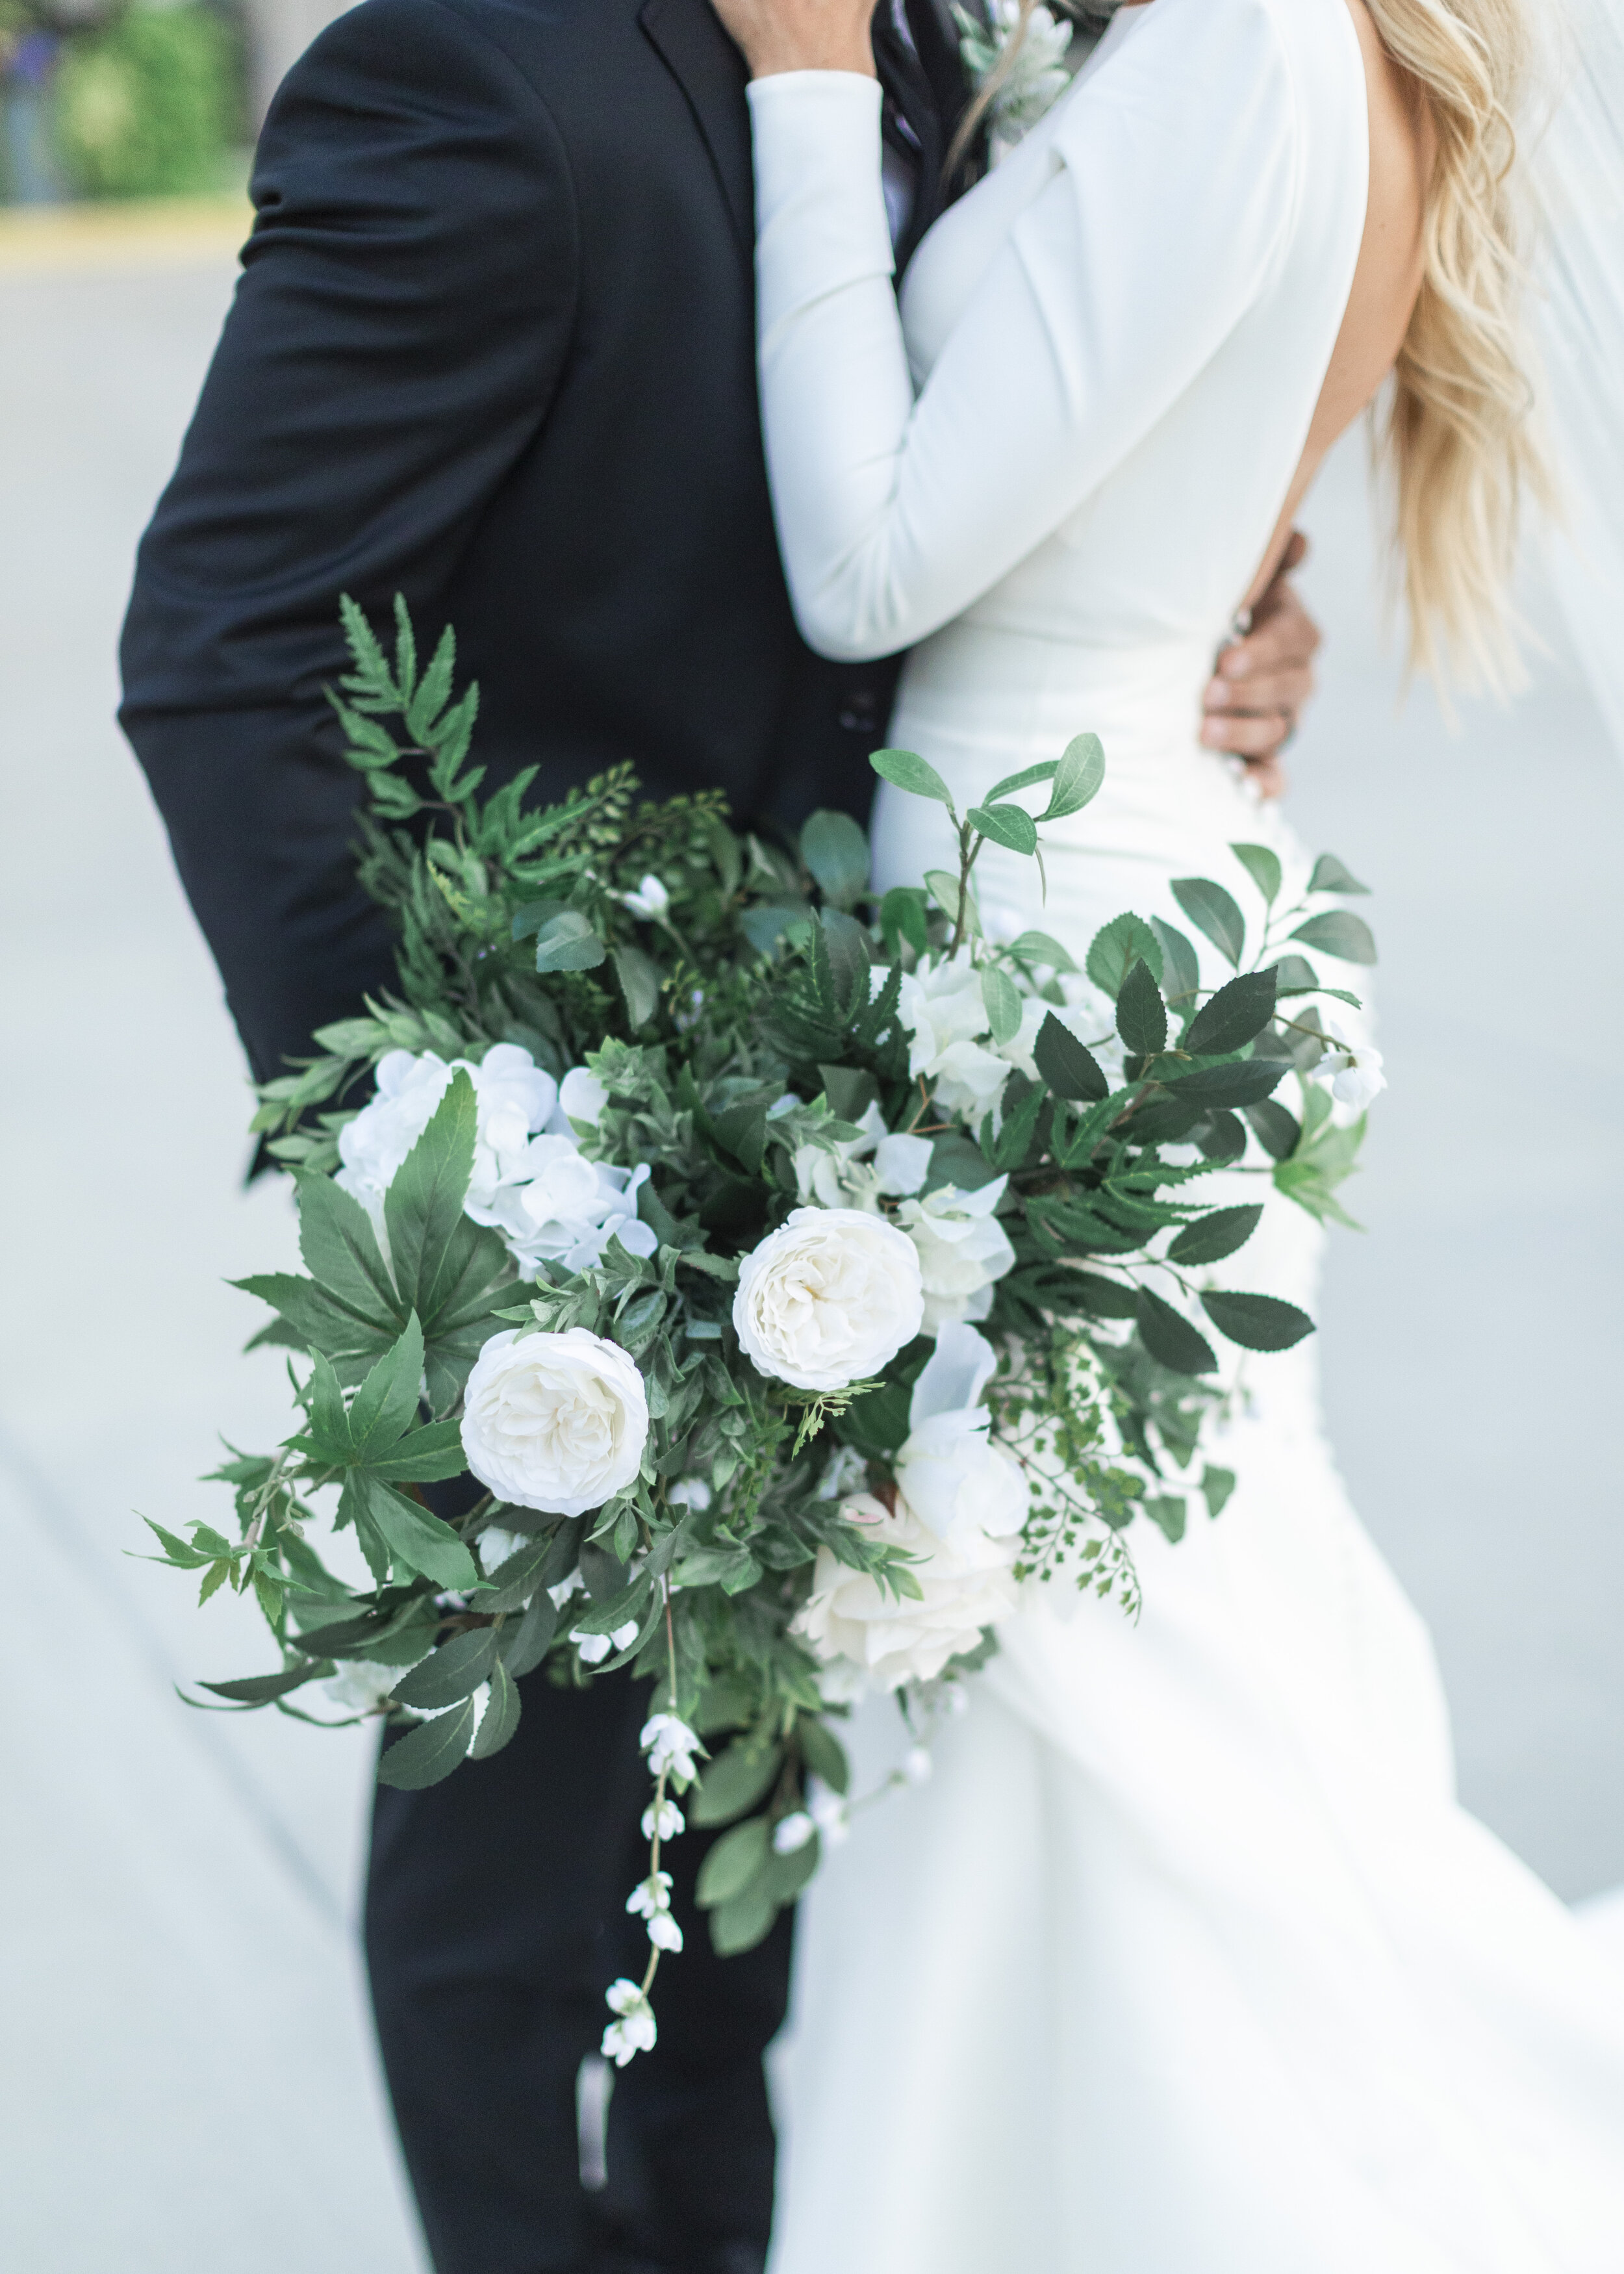  A newly married couple embrace while the groom holds a stunning white and green floral bouquet captured by Salt Lake City photographer Savanna Richardson Photography. Detailed wedding shot featuring bridal bouquet summer Utah weddings #savannarichar